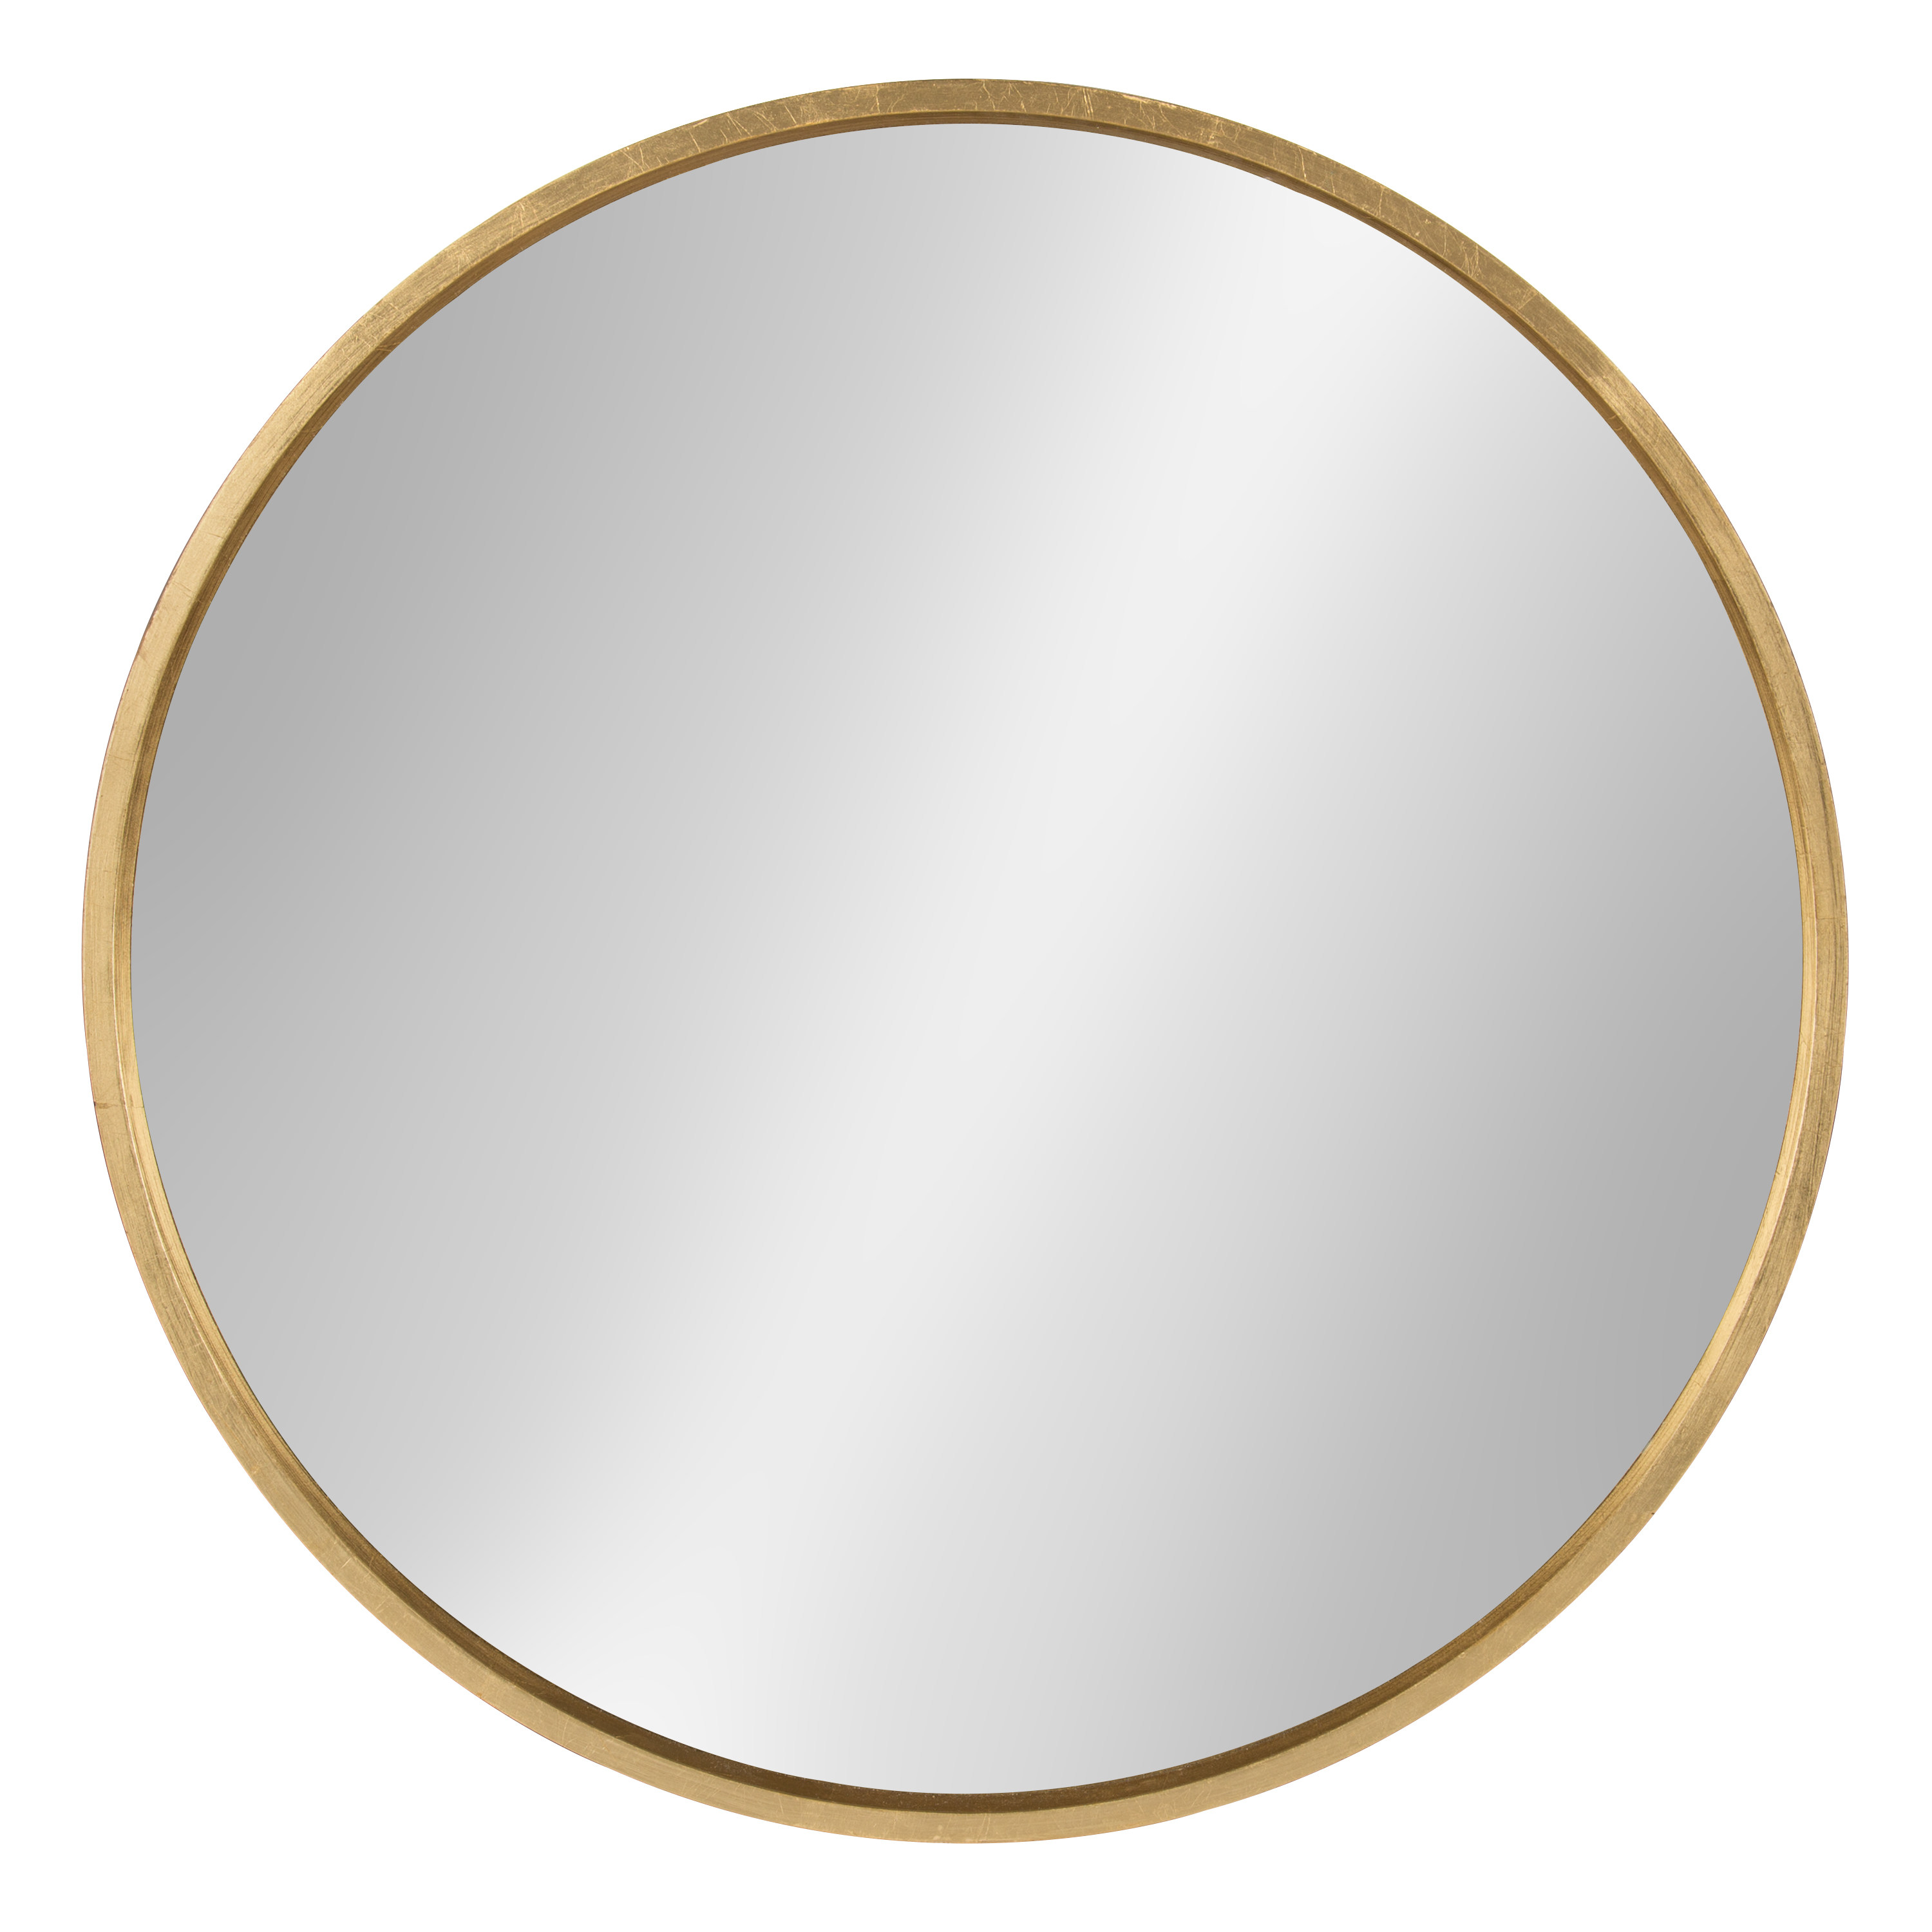 Kate and Laurel Travis Round Wood Wall Mirror, 25.6" Diameter, Gold, Modern  Glam Wall Décor Accent